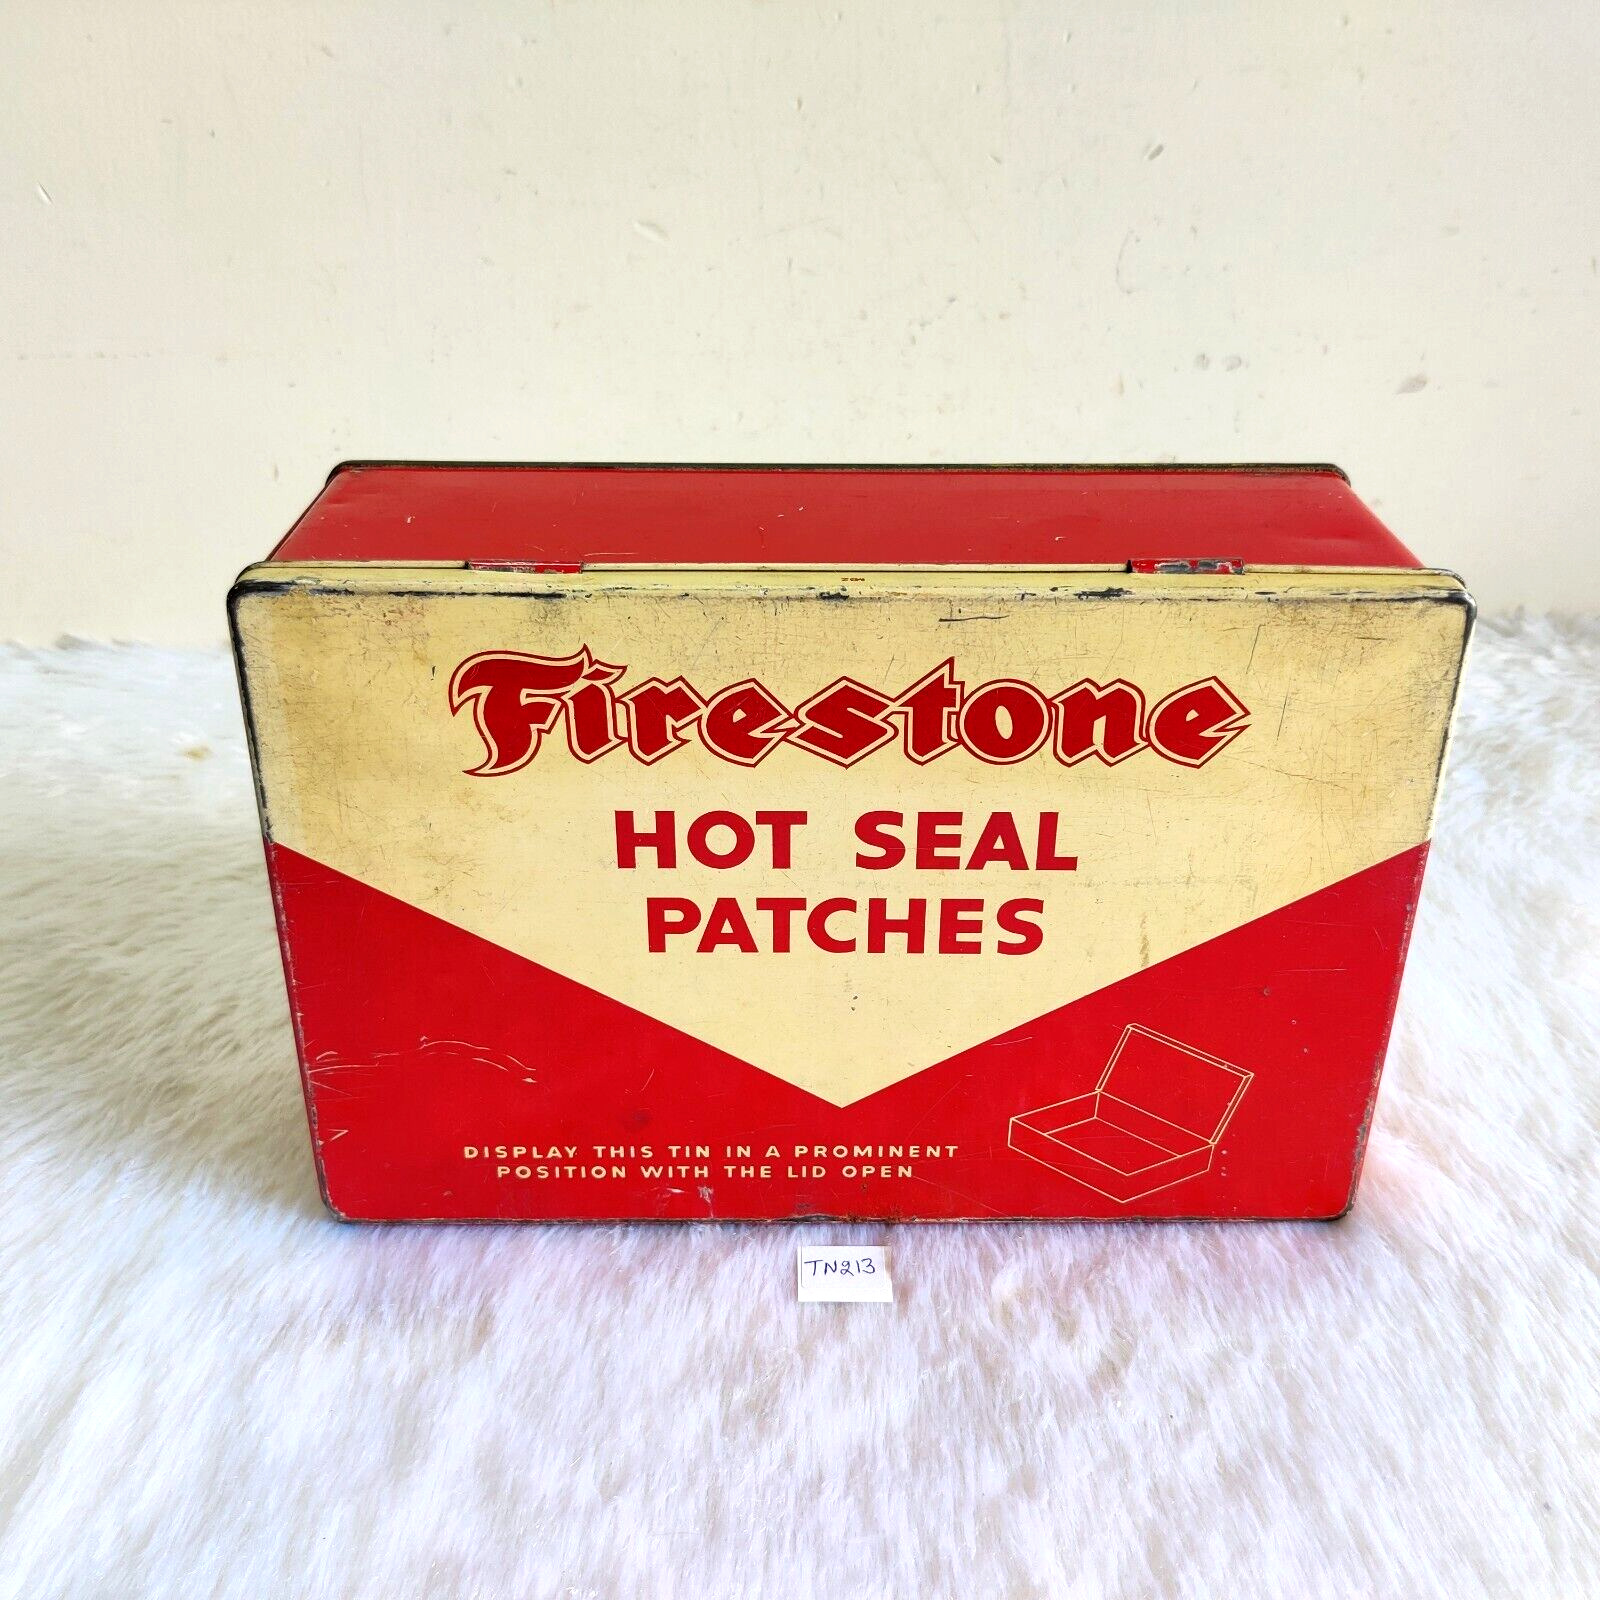 1950s Vintage Firestone Hot Seal Patches Advertising Tin Box Collectible TN123